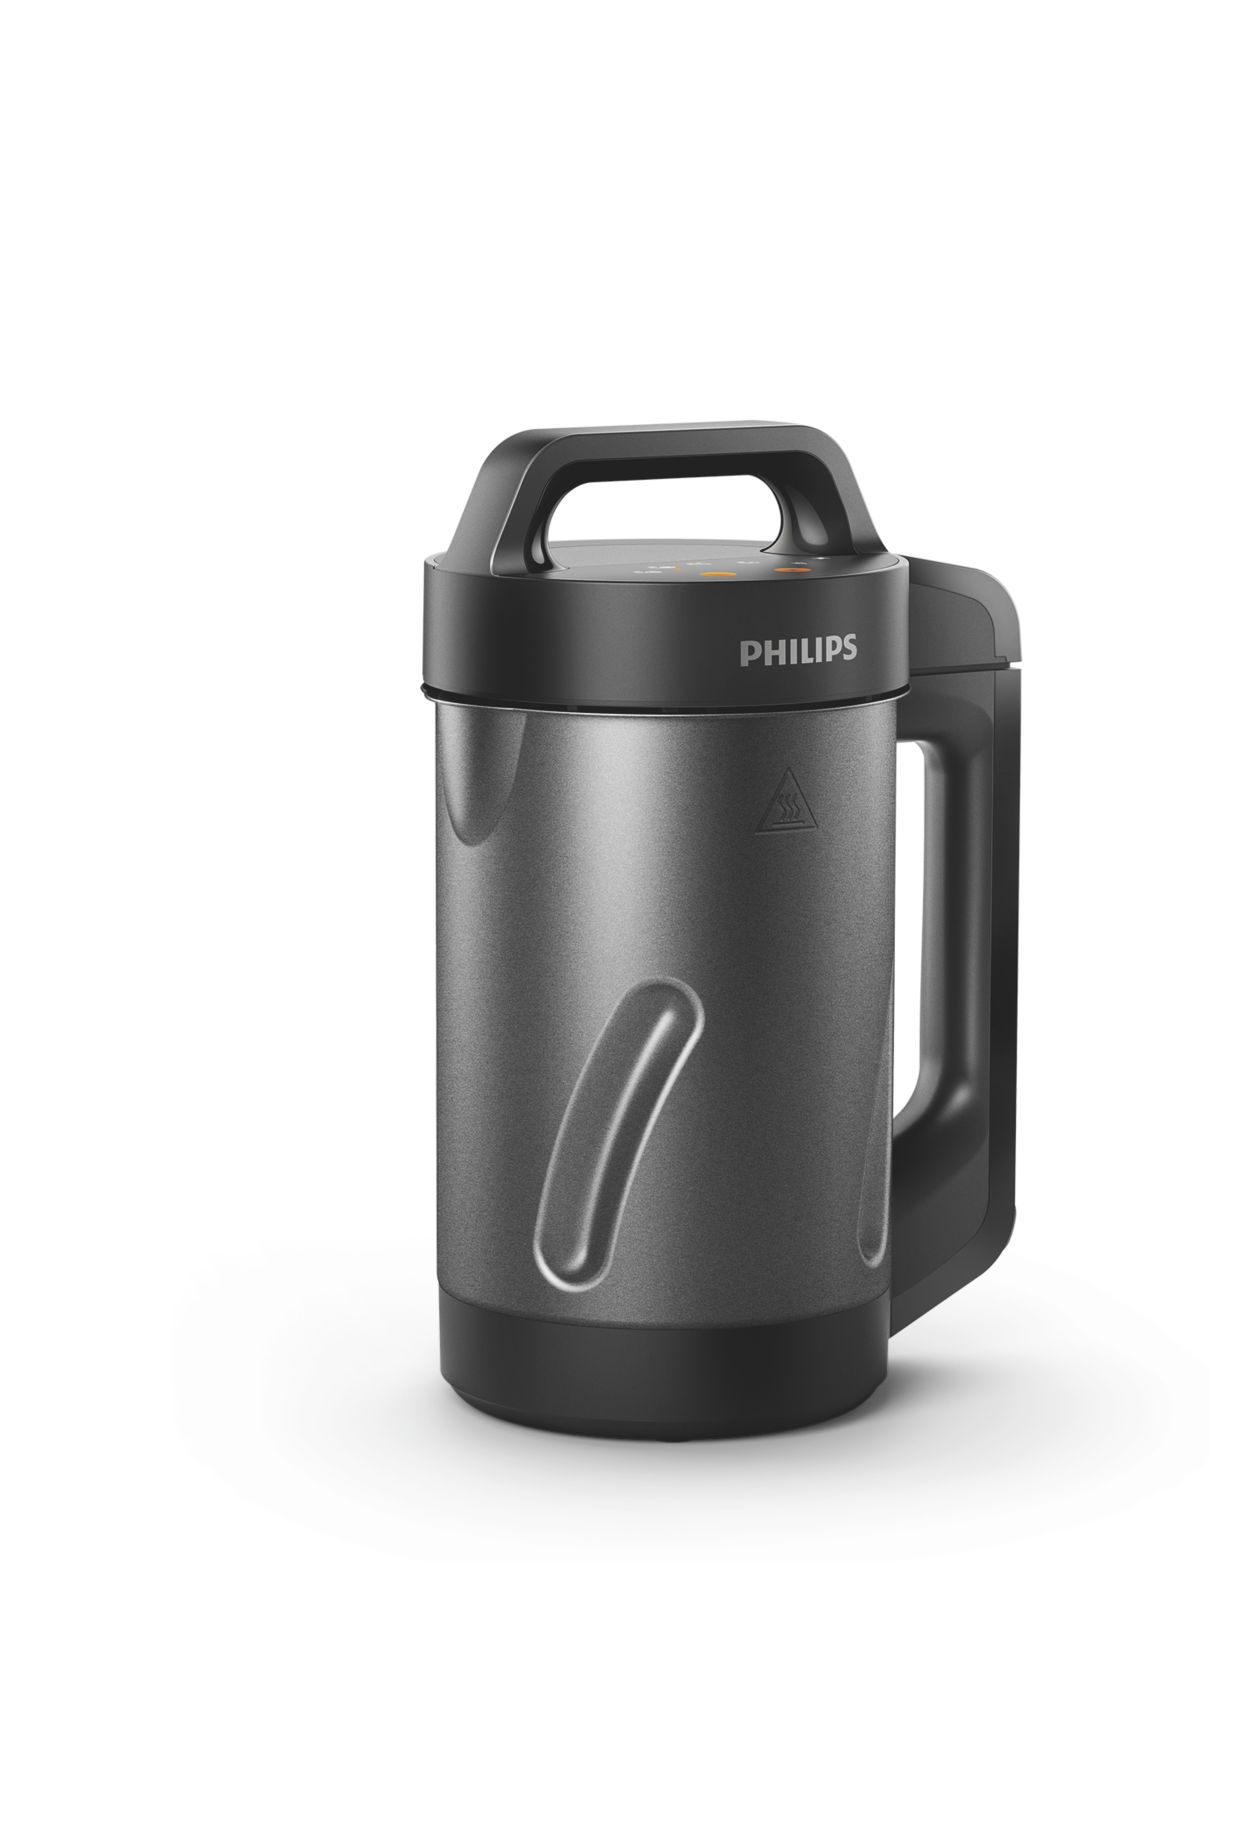 New Philips Viva Collection Soup Maker, Black & Stainless Steel